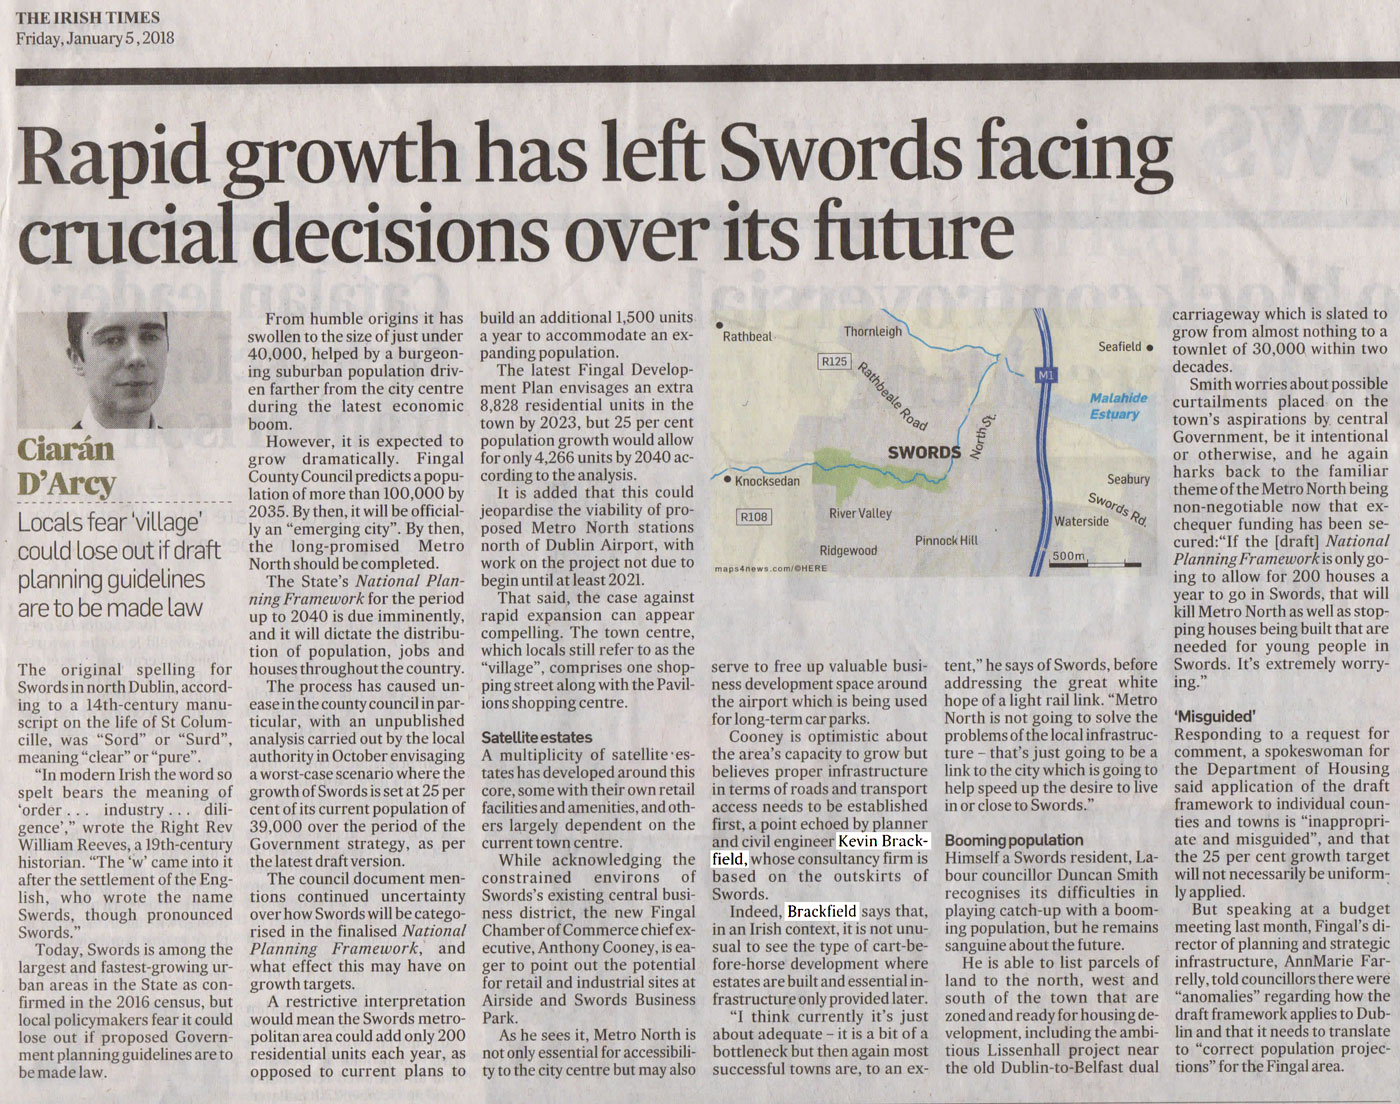 Kevin Brackfield comments in ‘The Irish Times’ on the rapid growth of Swords and the need for proper planning and infrastructure.